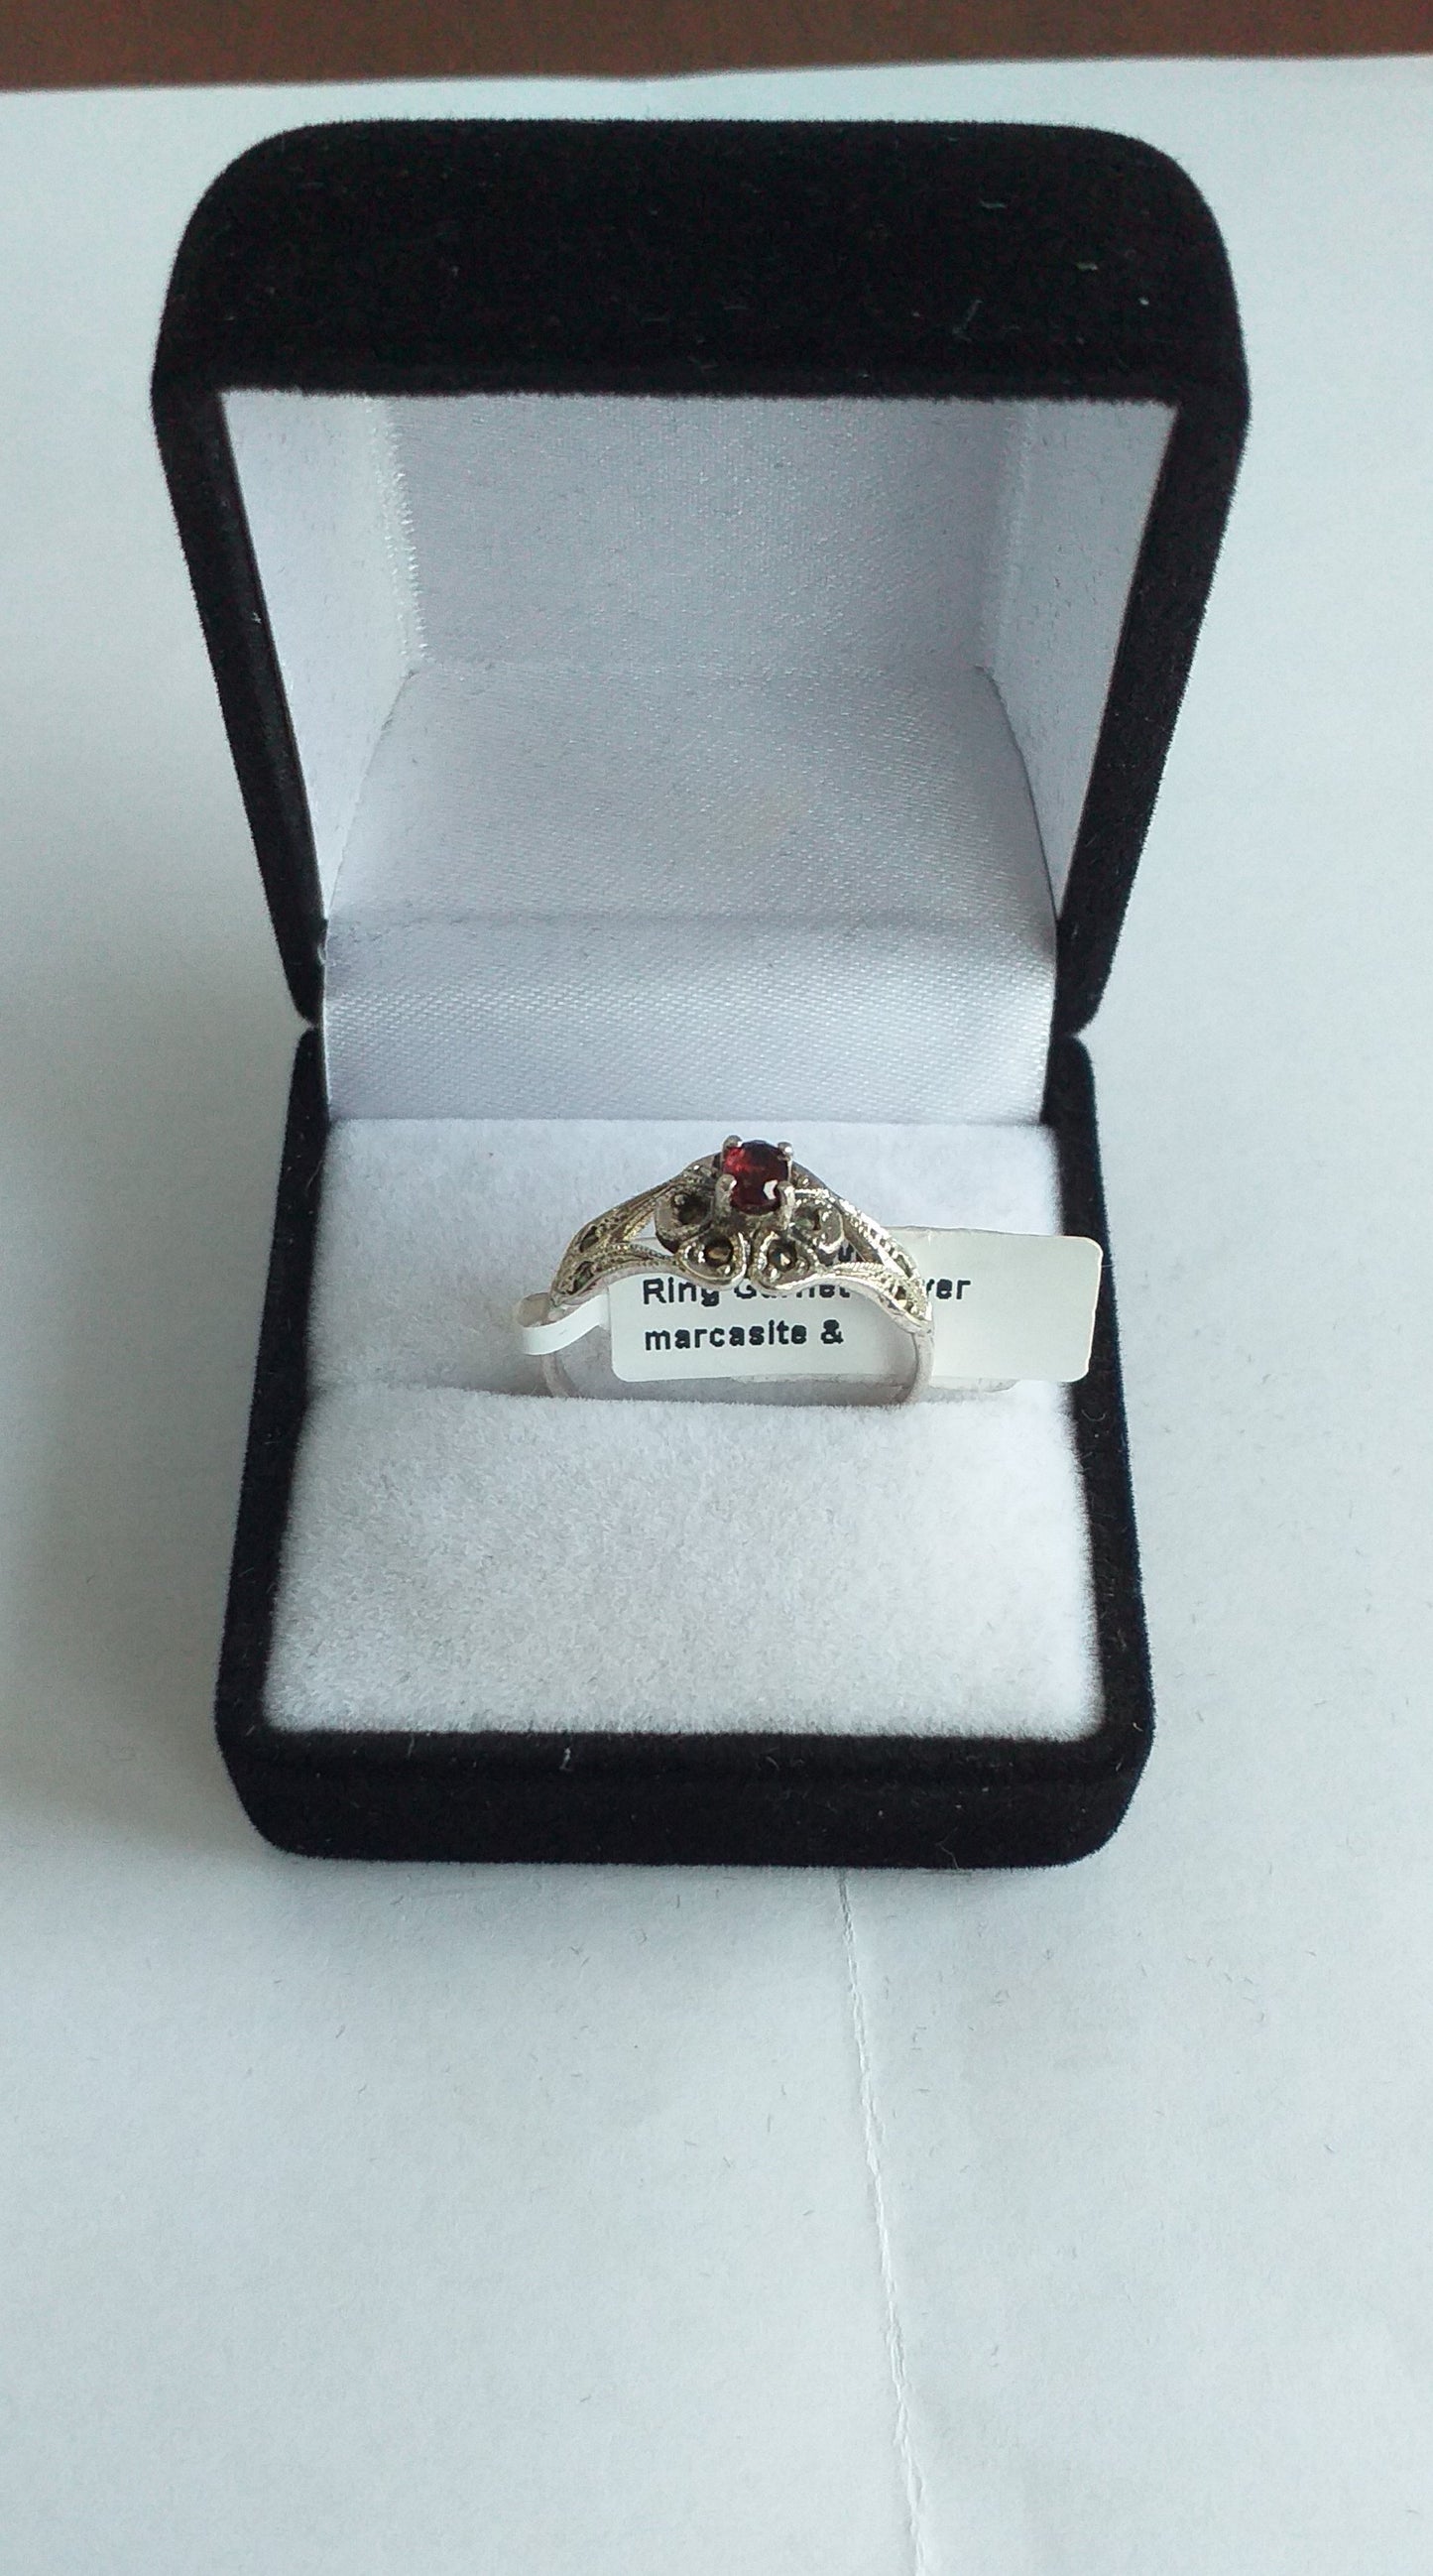 Ring, Garnet and marcarsite flower style on a Sterling Silver, band - Broadfield Flowers Florist Lincoln